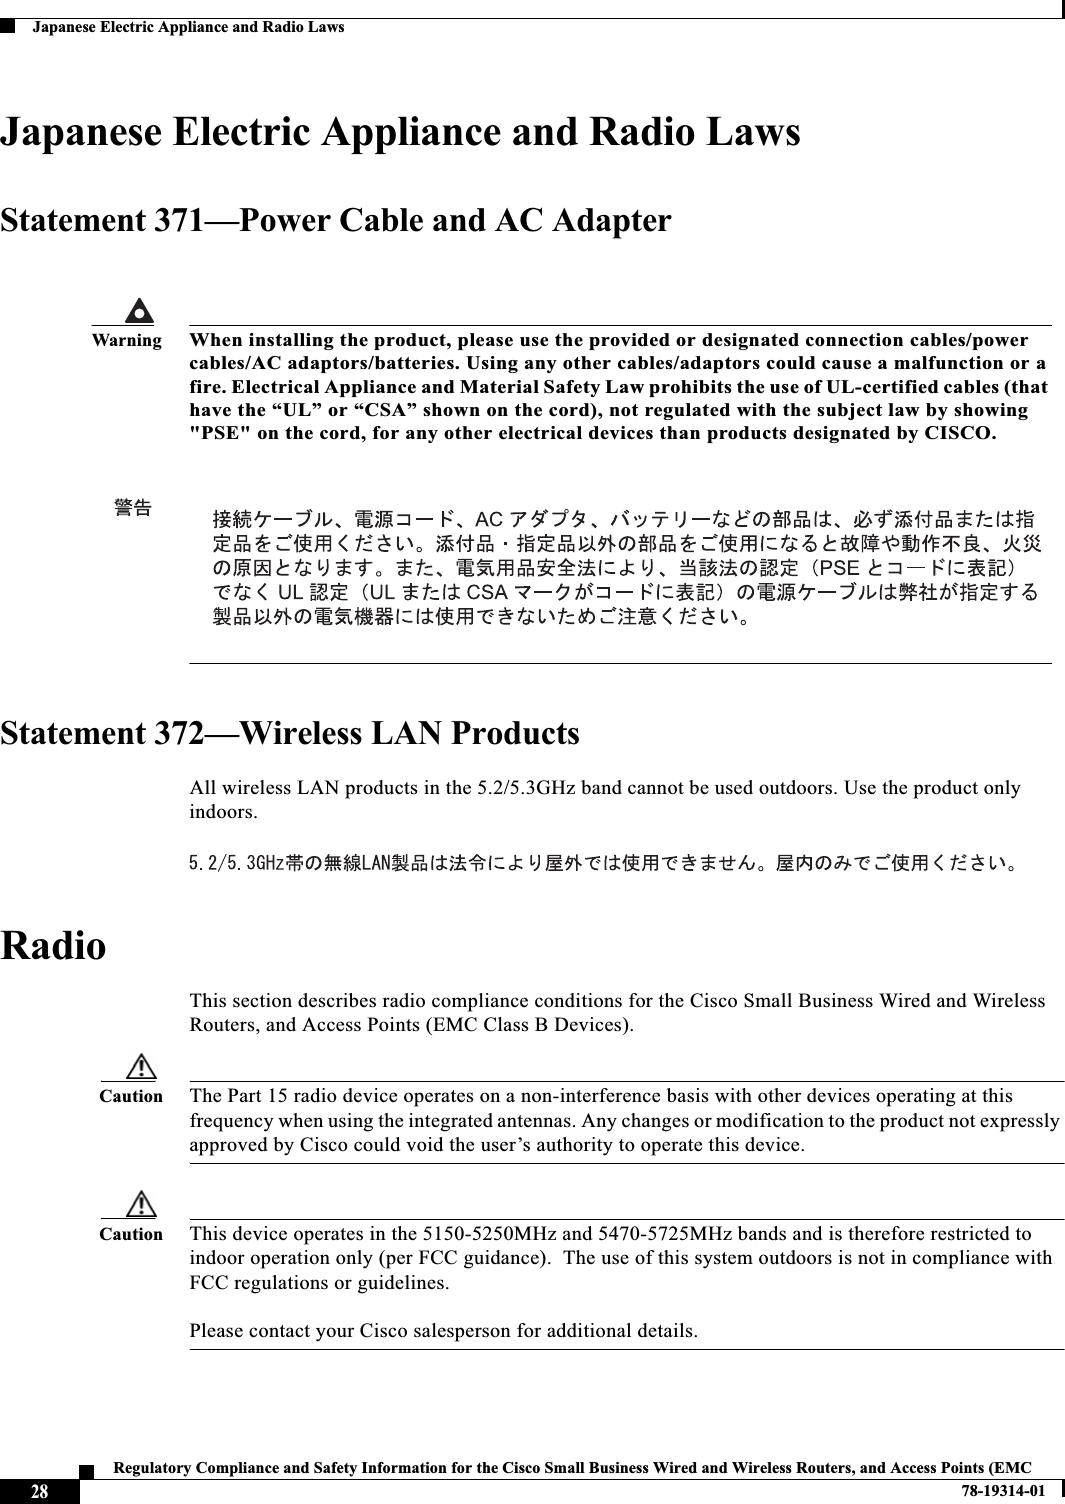 28Regulatory Compliance and Safety Information for the Cisco Small Business Wired and Wireless Routers, and Access Points (EMC 78-19314-01Japanese Electric Appliance and Radio LawsJapanese Electric Appliance and Radio LawsStatement 371—Power Cable and AC AdapterStatement 372—Wireless LAN ProductsAll wireless LAN products in the 5.2/5.3GHz band cannot be used outdoors. Use the product only indoors. RadioThis section describes radio compliance conditions for the Cisco Small Business Wired and Wireless Routers, and Access Points (EMC Class B Devices).Caution The Part 15 radio device operates on a non-interference basis with other devices operating at this frequency when using the integrated antennas. Any changes or modification to the product not expressly approved by Cisco could void the user’s authority to operate this device.Caution This device operates in the 5150-5250MHz and 5470-5725MHz bands and is therefore restricted to indoor operation only (per FCC guidance).  The use of this system outdoors is not in compliance with FCC regulations or guidelines.   Please contact your Cisco salesperson for additional details.WarningWhen installing the product, please use the provided or designated connection cables/power cables/AC adaptors/batteries. Using any other cables/adaptors could cause a malfunction or a fire. Electrical Appliance and Material Safety Law prohibits the use of UL-certified cables (that have the “UL” or “CSA” shown on the cord), not regulated with the subject law by showing &quot;PSE&quot; on the cord, for any other electrical devices than products designated by CISCO.